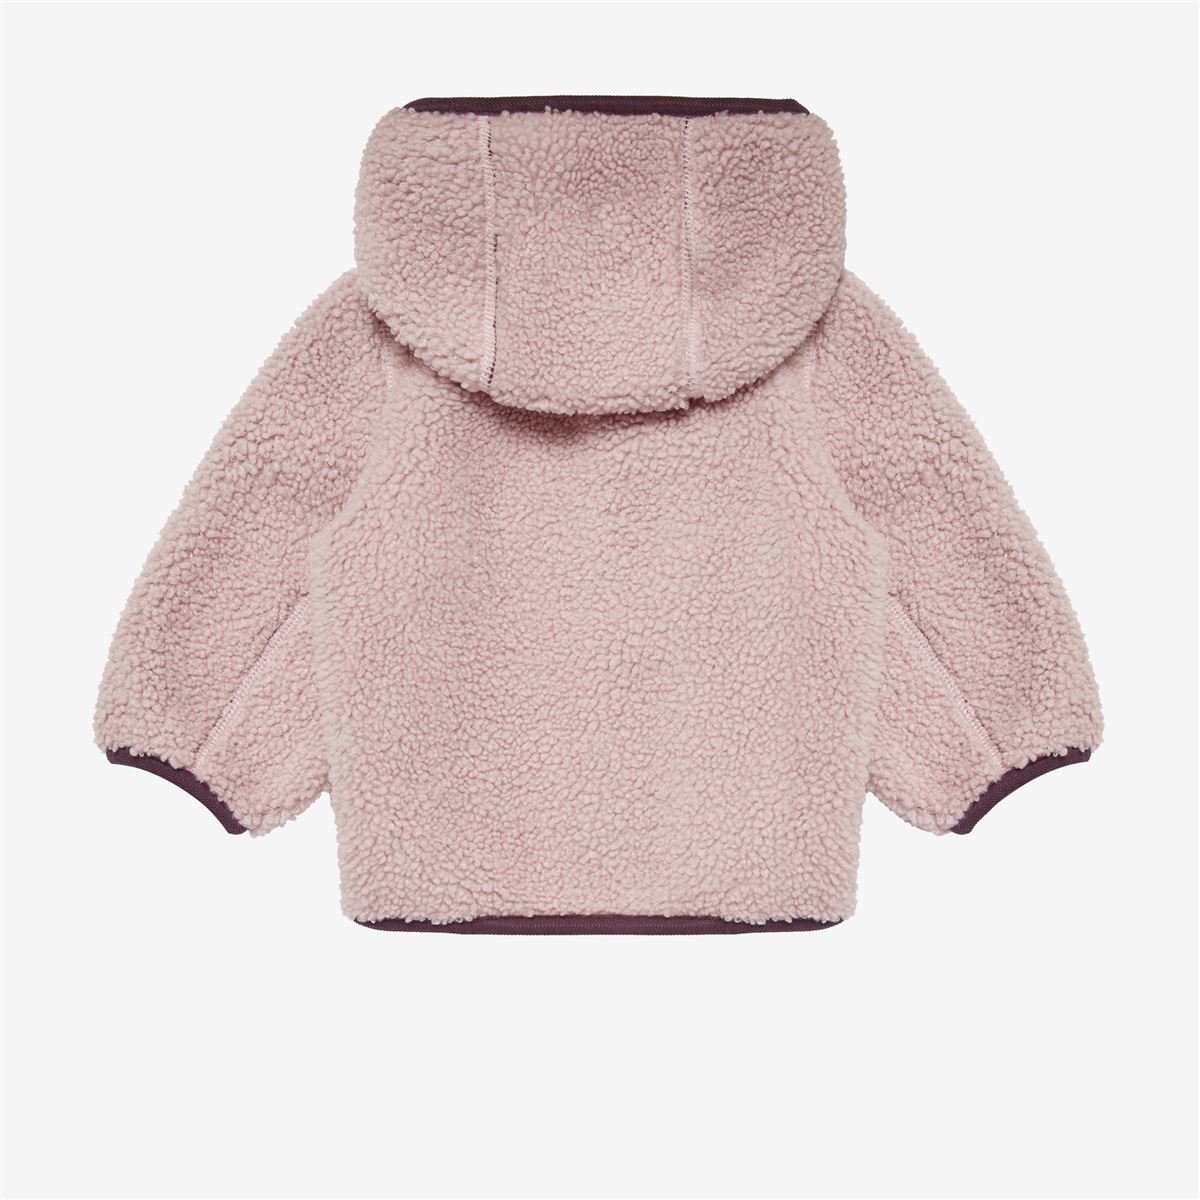 E. JANNELL POLAR - JACKET - BABY - PINK